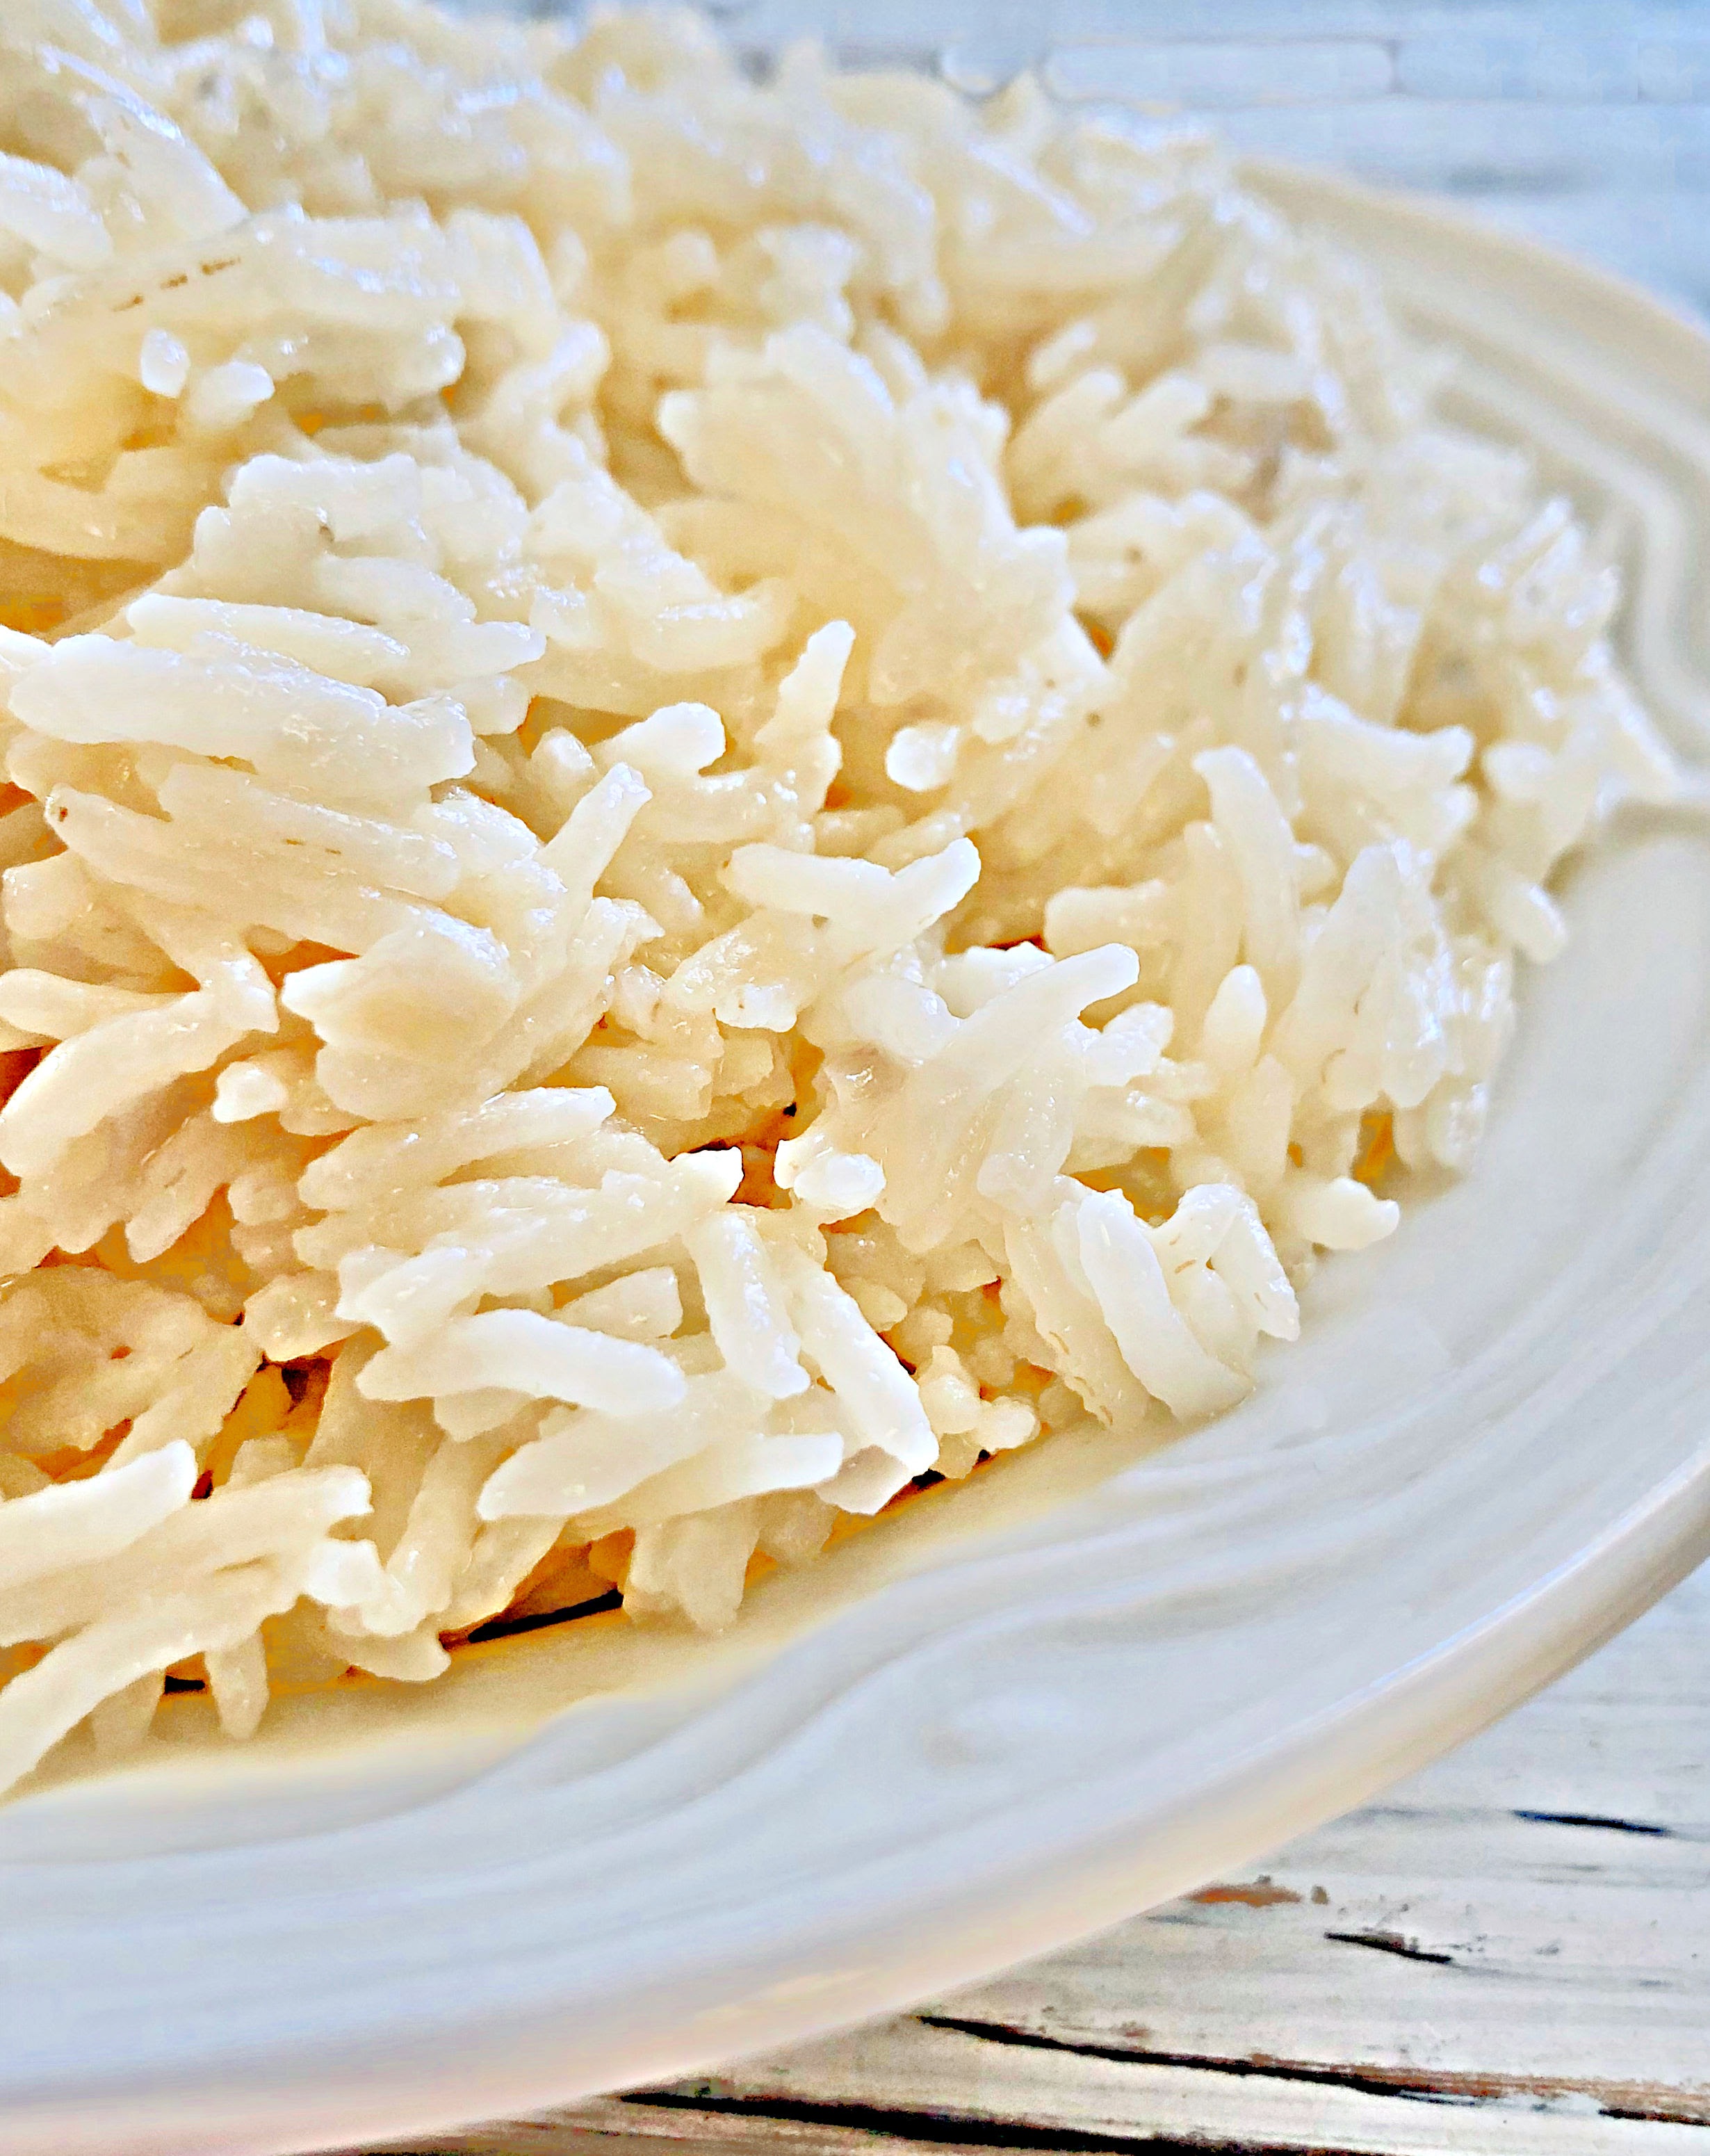 Basmati Coconut Rice - an easy and delicious way to elevate a meal with only a few simple ingredients.

#coconutrice #basmatirice #easyricerecipes #pantryrecipes #quarantinecooking #thiswifecooksrecipes #plantbasedrice #veganrice #indianrice #caribbeanrice via @thiswifecooks